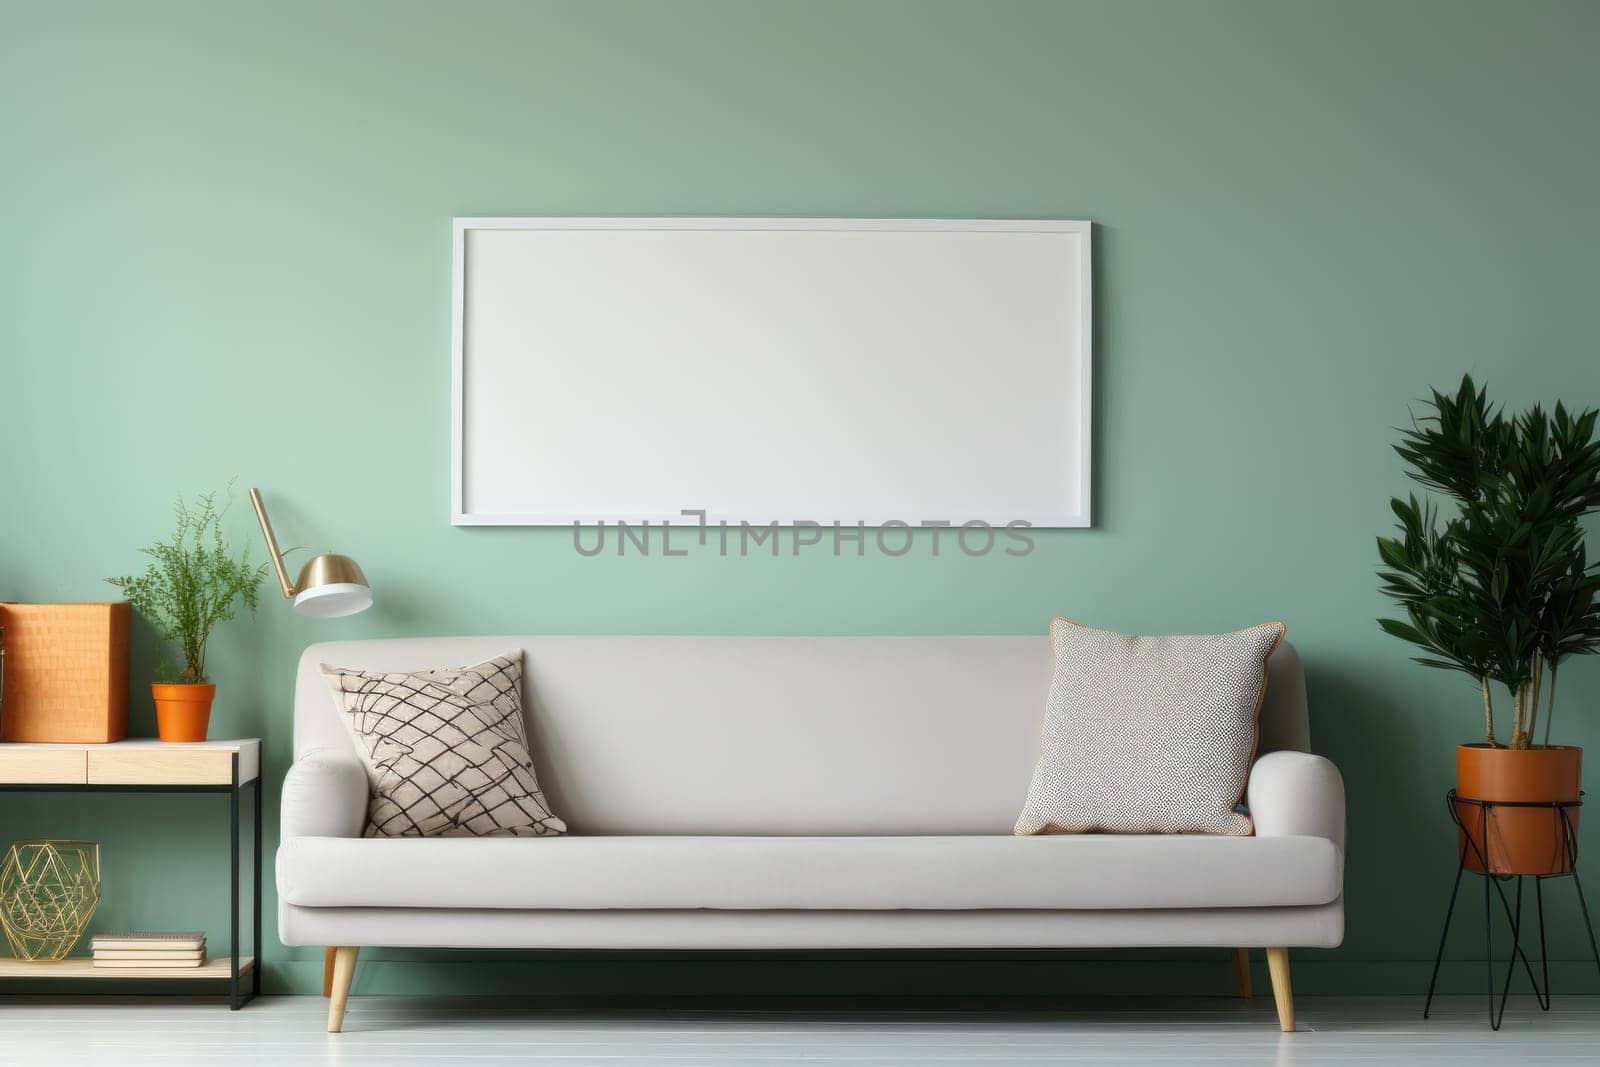 Photo frame on wall with sofa and living room setting. High quality photo